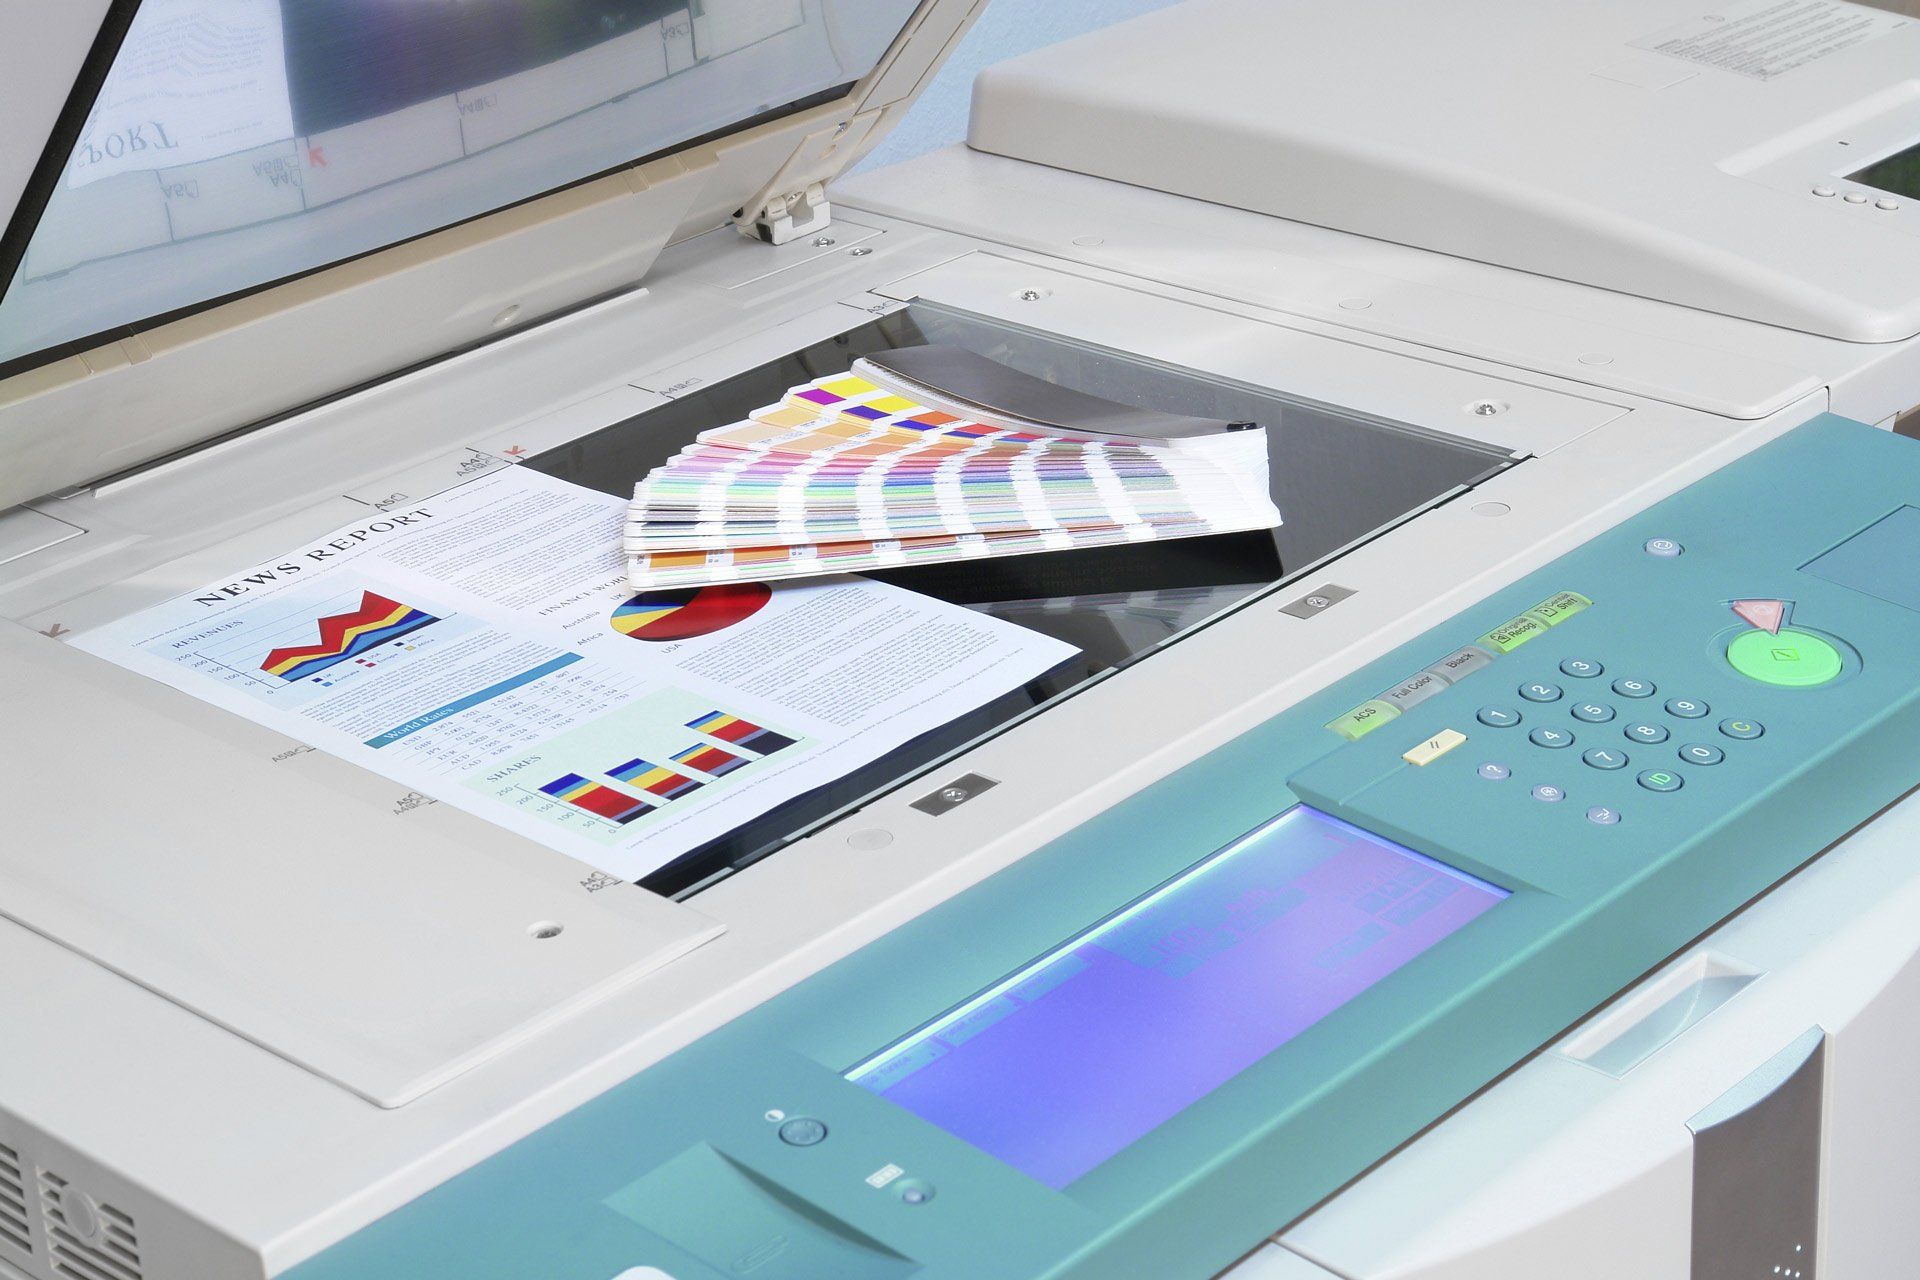 Copy Machine with Colour Chart and Printed Document | Mount Druitt, Nsw | Terry’s Mt Druitt Printing Service